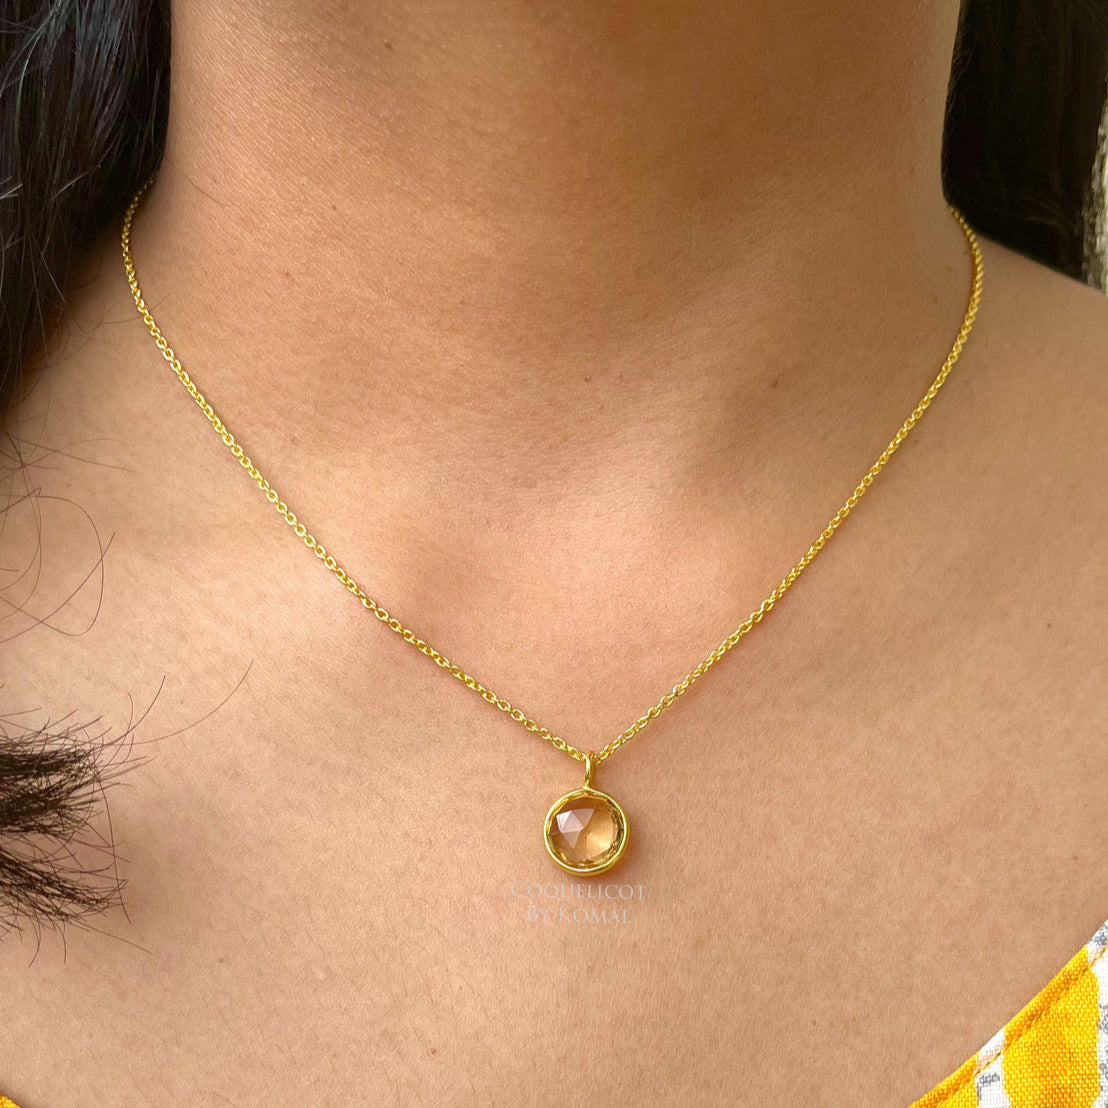 Gold Citrine Necklace - November, Birthstone, personalized, classic, yellow,  oval, jewelry, birthday | Beautiful jewelry, Citrine necklace, Jewelry